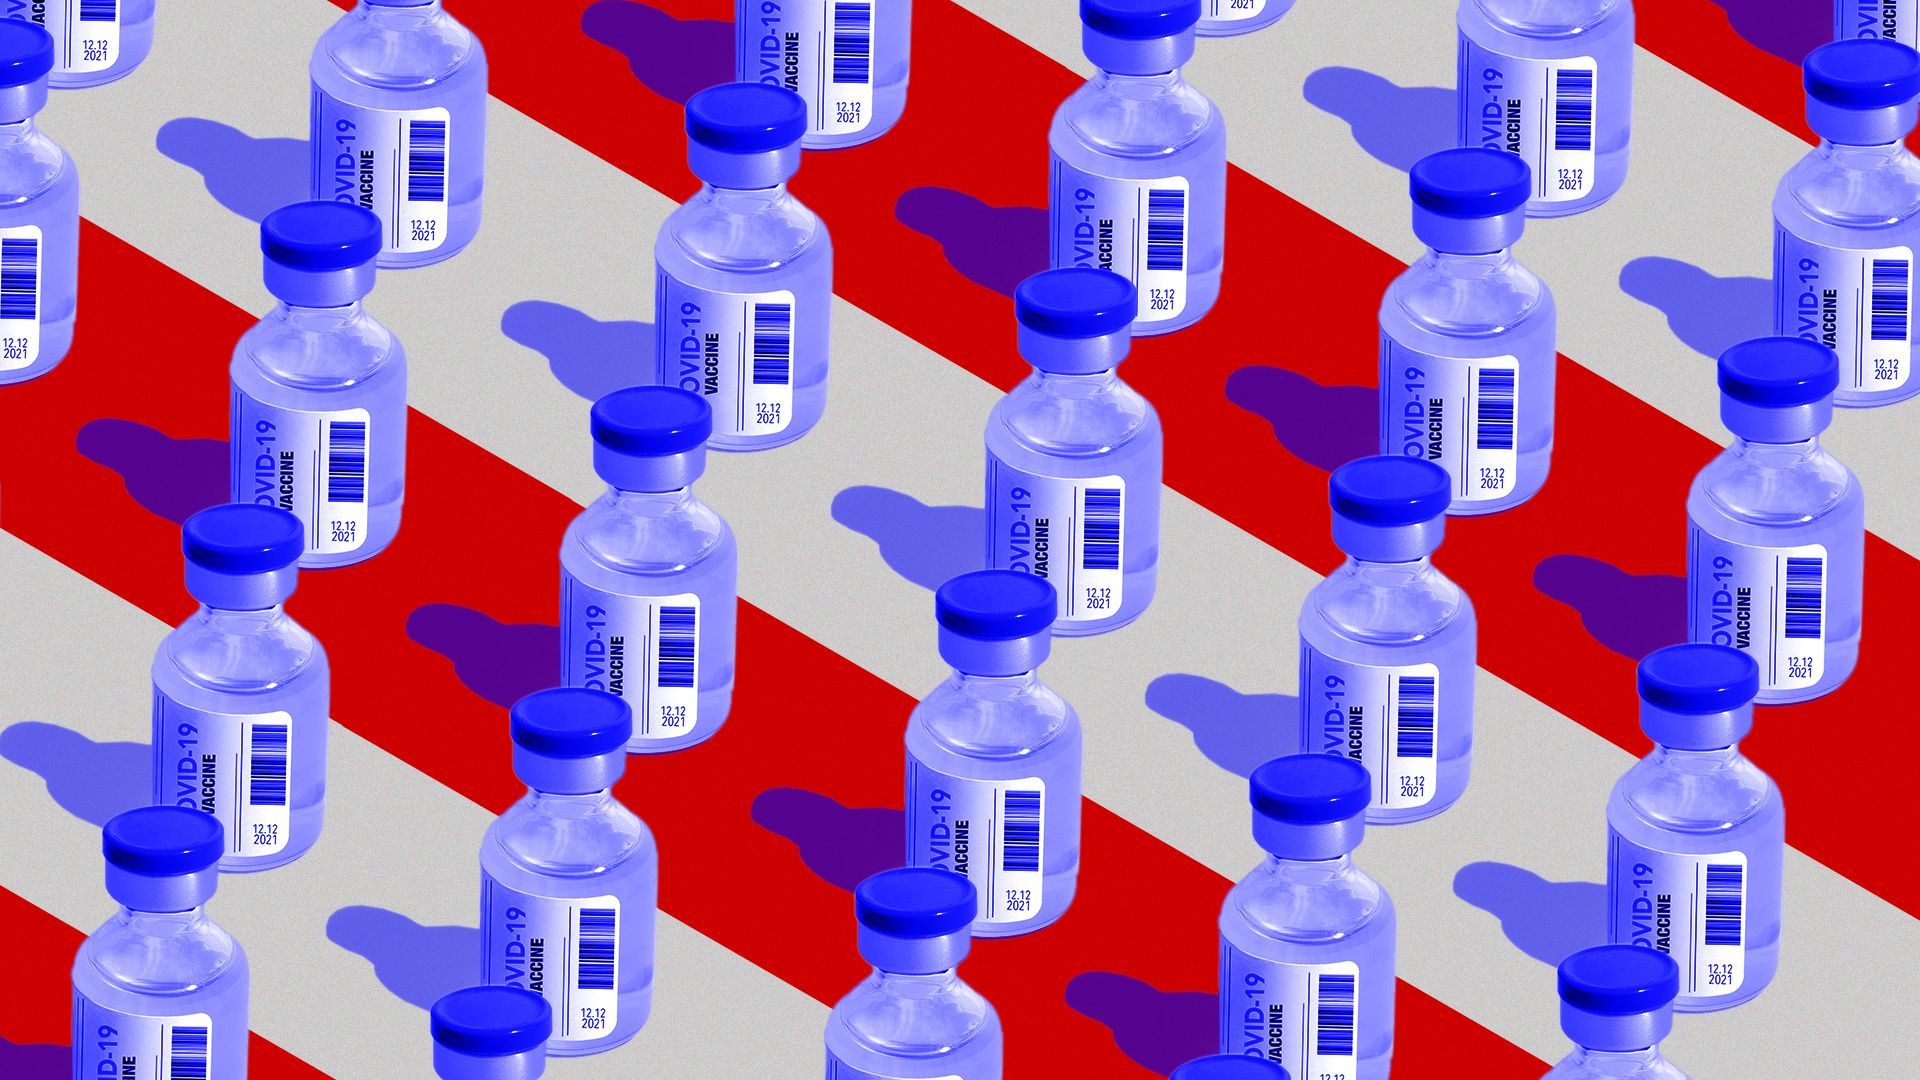 Illustration of pattern of blue Covid-19 vaccine bottles on top of red and white stripes of American flag.